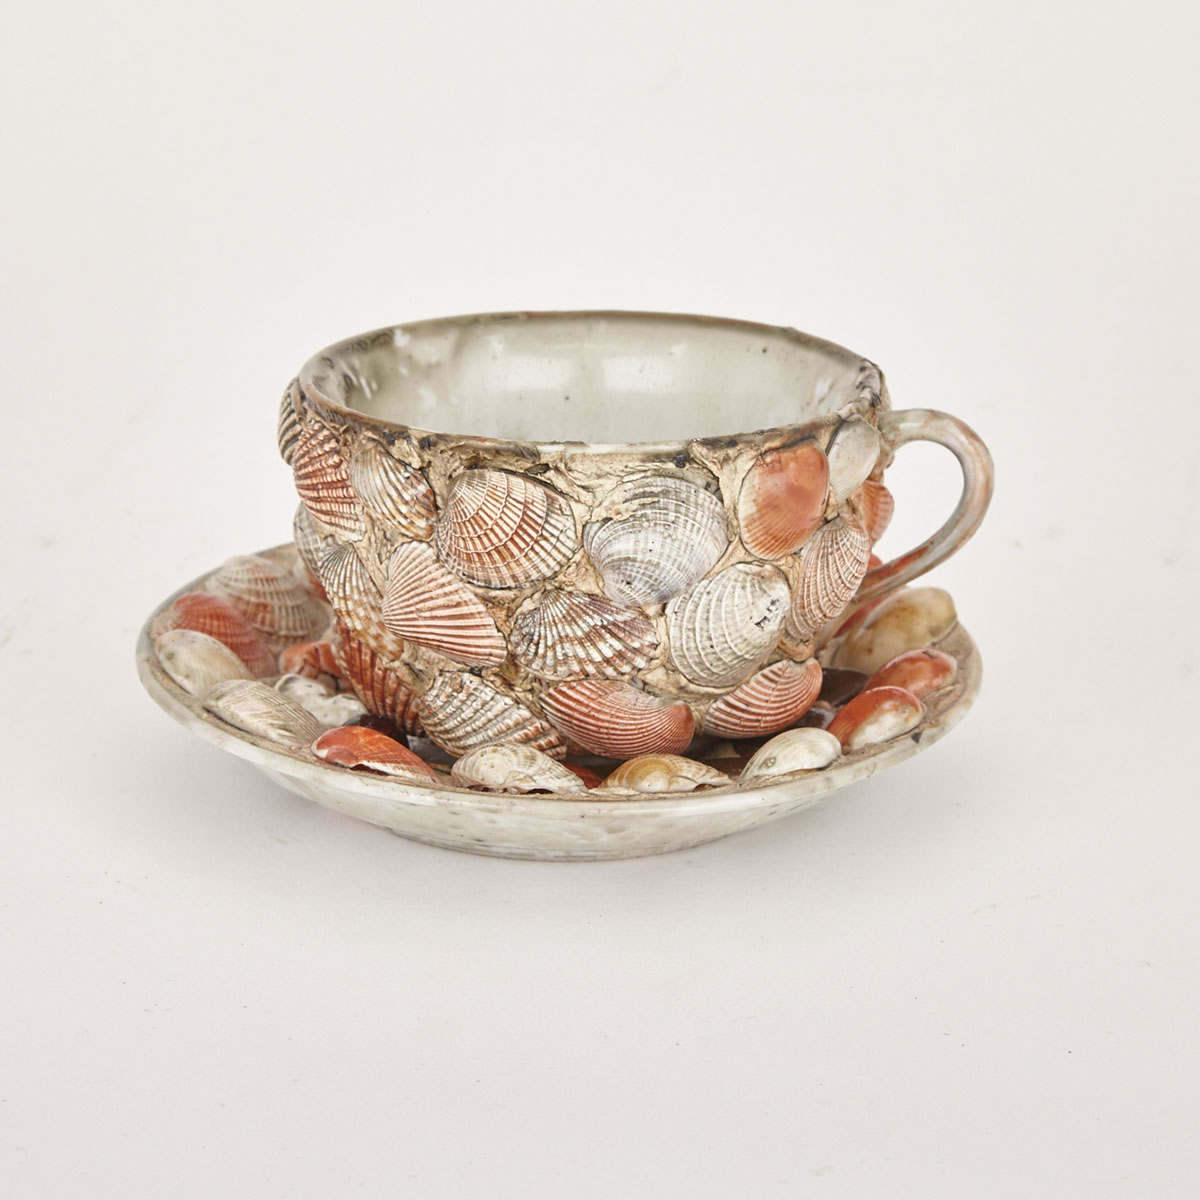 ‘Memory Ware’ Teacup and Saucer, early 20th century